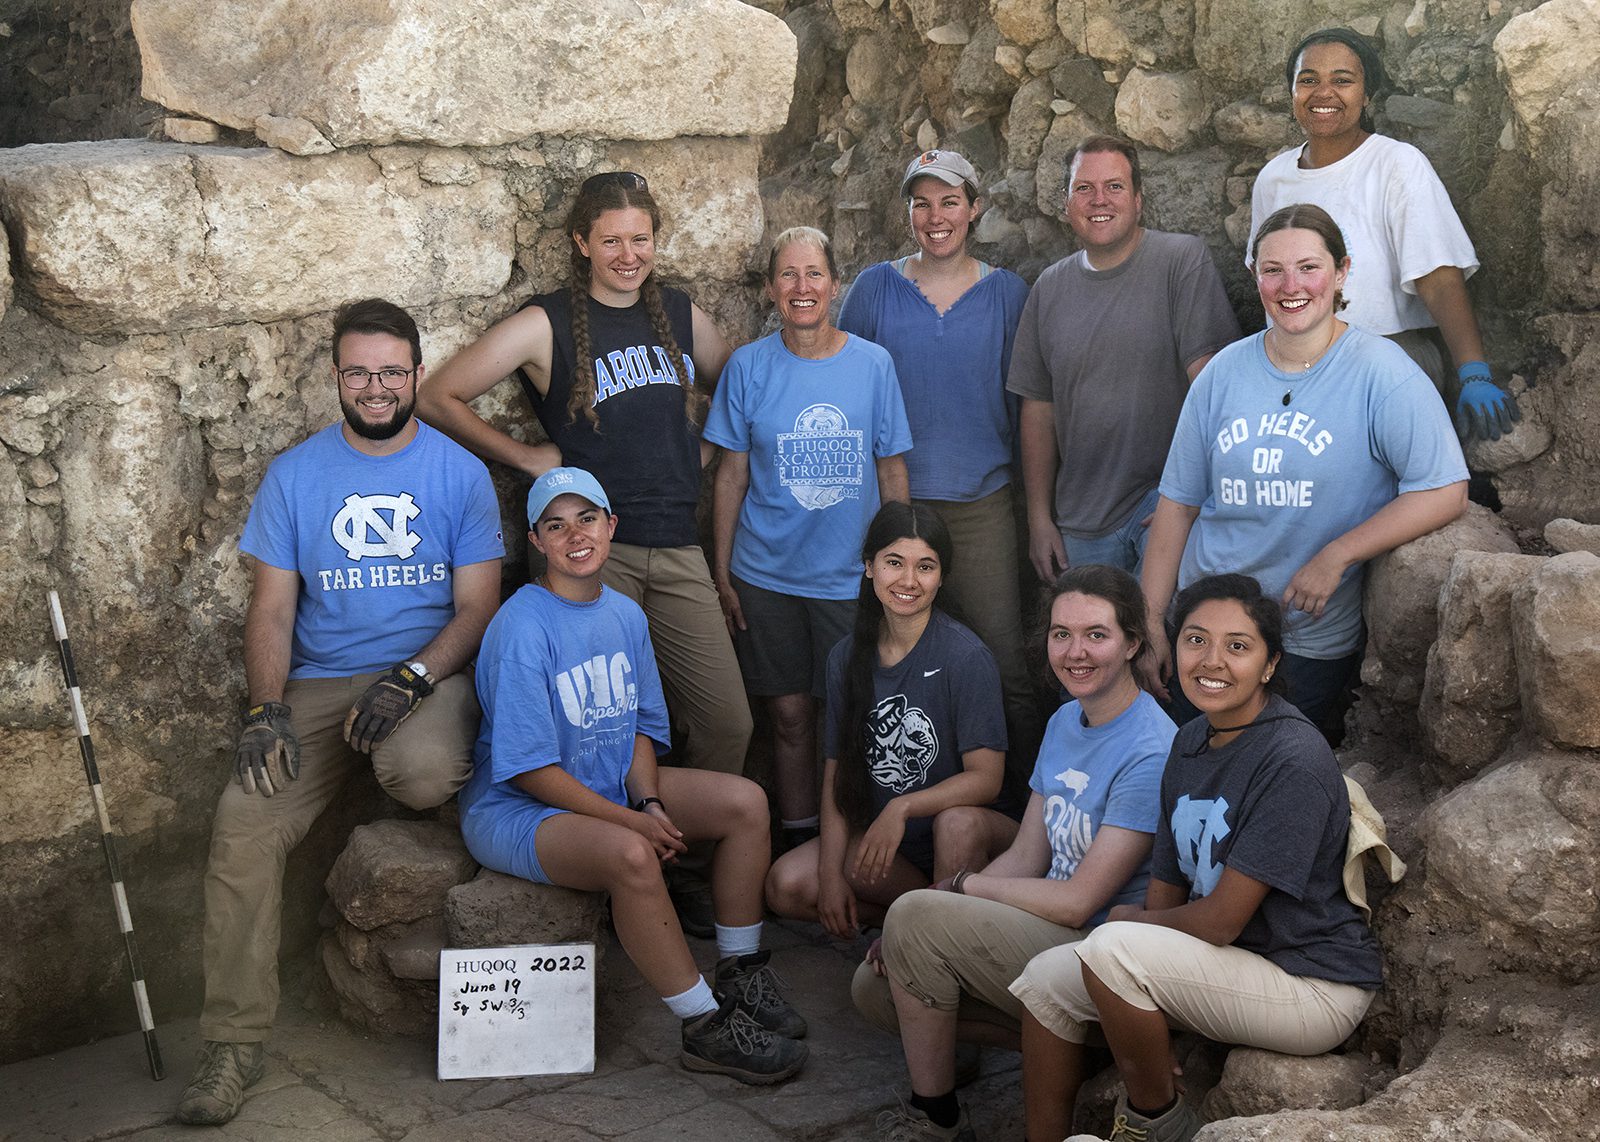 UNC-Chapel Hill excavation participants at the Huqoq dig in June 2022, including graduate students and alumni. Bottom row from left to right (seated): David Richman; Christine Stamey; Aislynn Grantz; Madison Brinkley; Suzy Lagunas. Top row from left to right (standing): Emily Branton; Jodi Magness; Jocelyn Burney; Matthew Grey; Grace Curry; Jada Enoch (top right). Photo © Jim Haberman